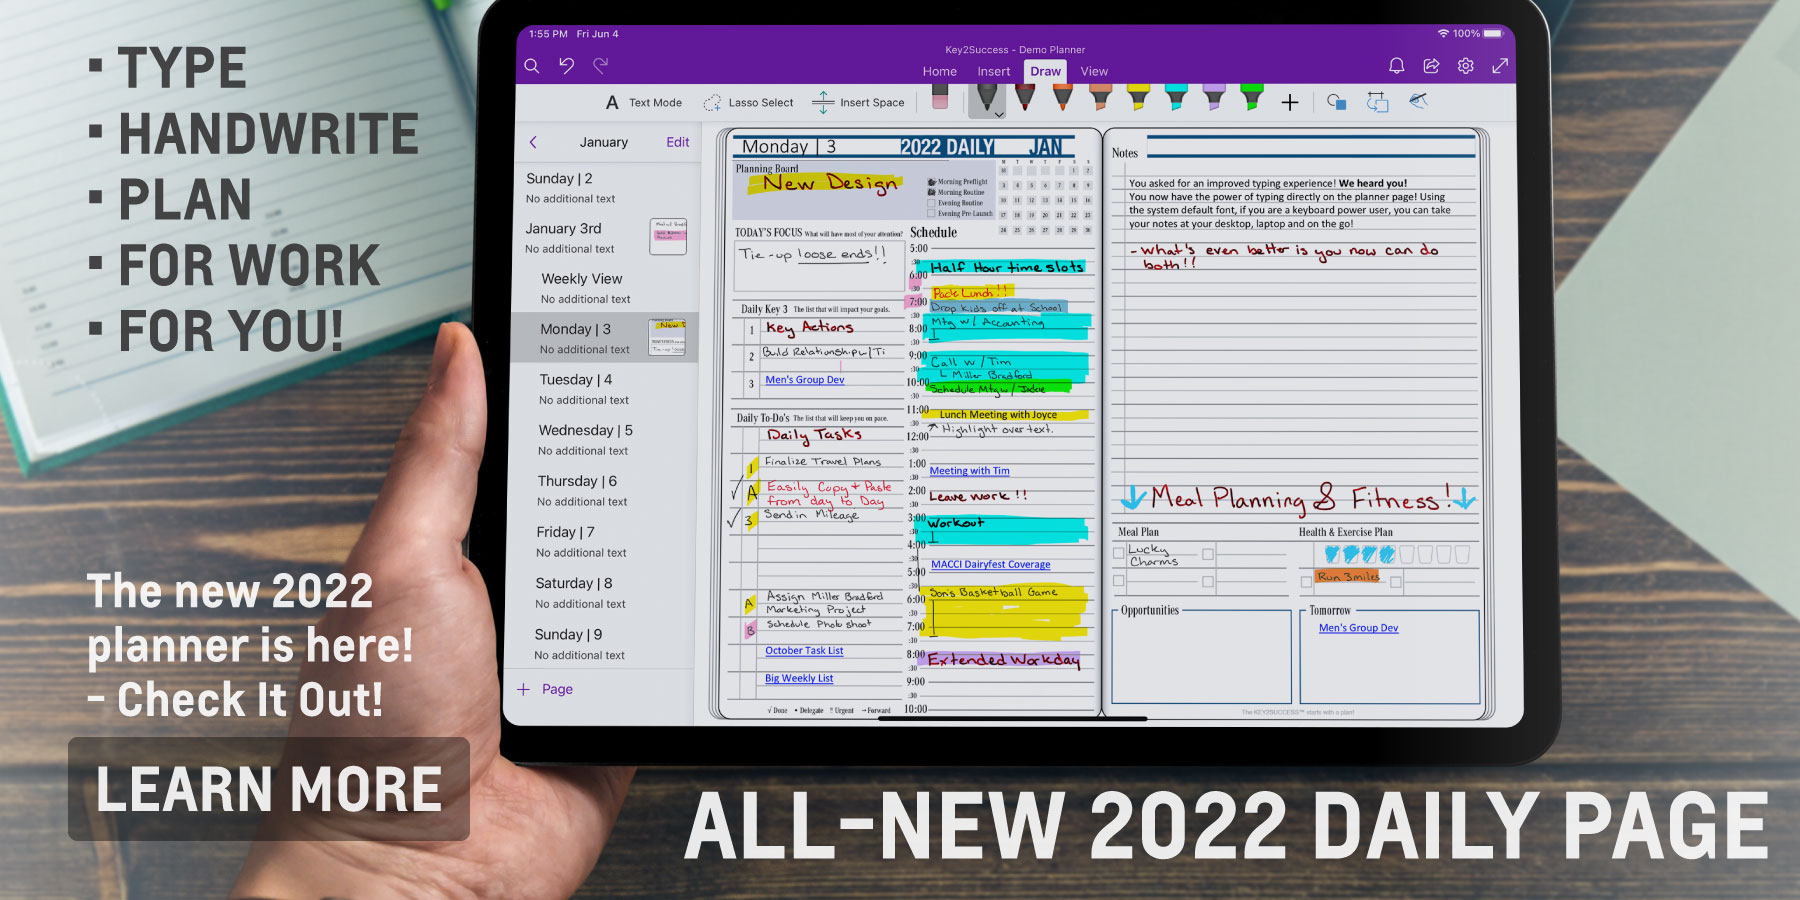 Onenote Planner Template 2022 Printable Word Searches